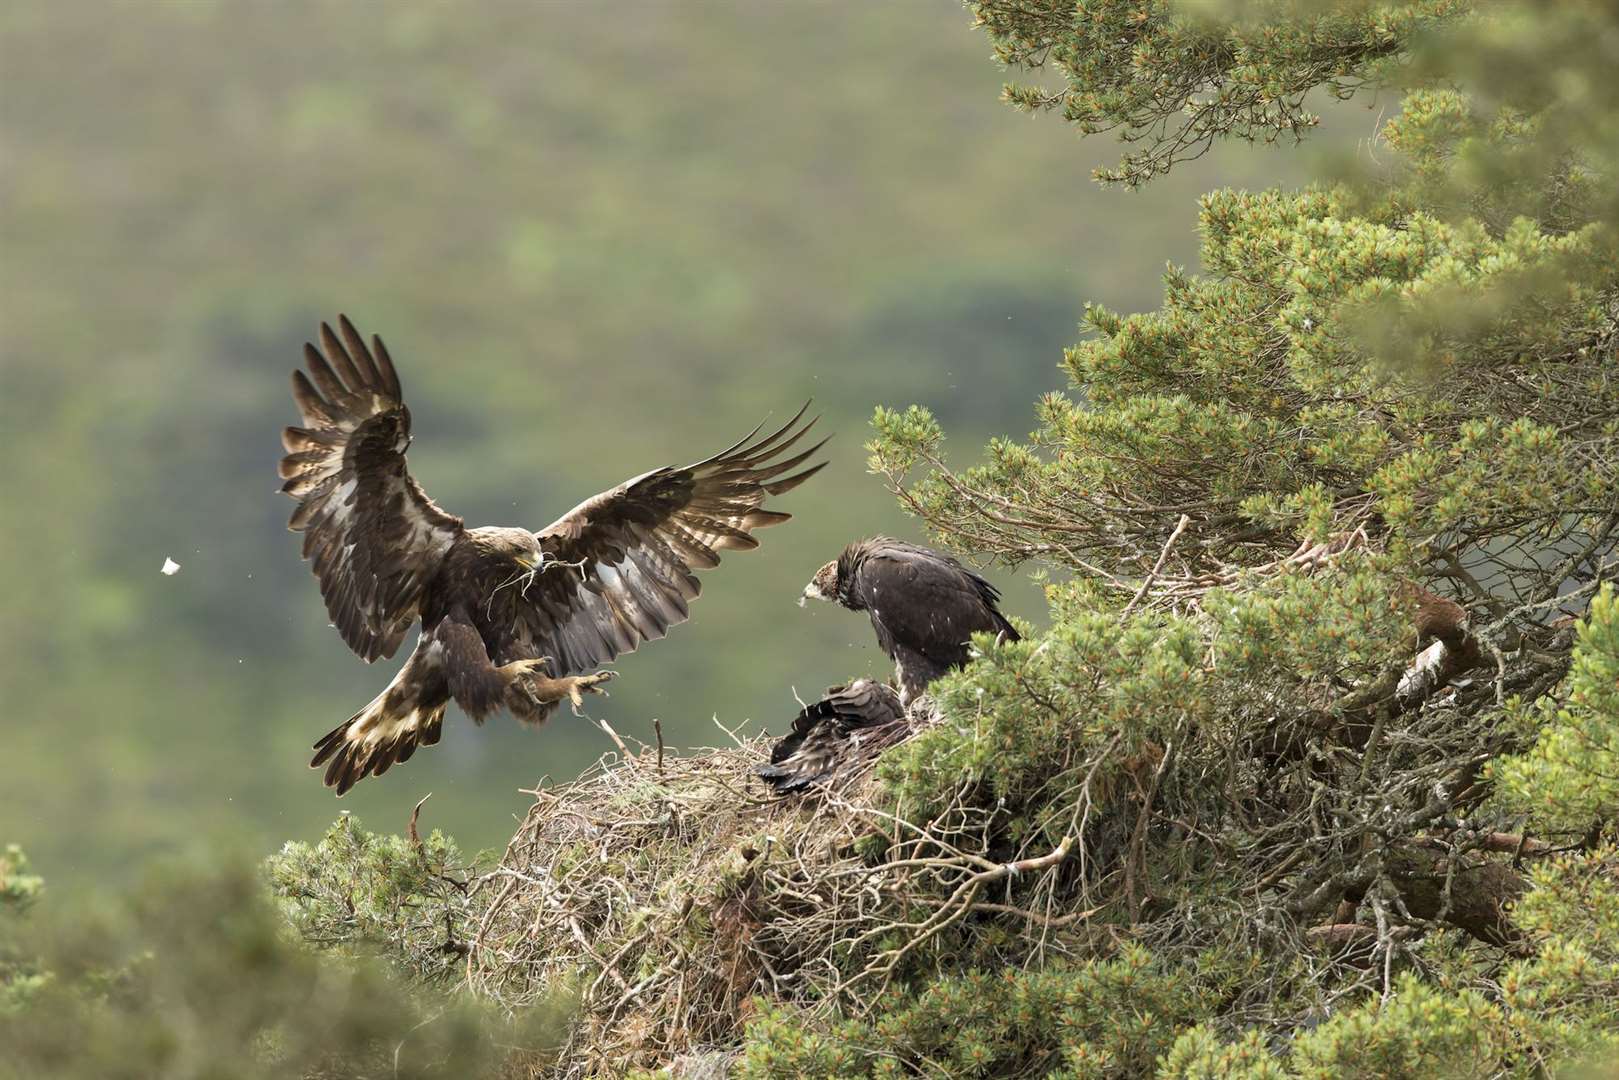 Golden eagle (Aquila chyrsaetos) adult female flying into nest site with small branch, Cairngorms National Park.